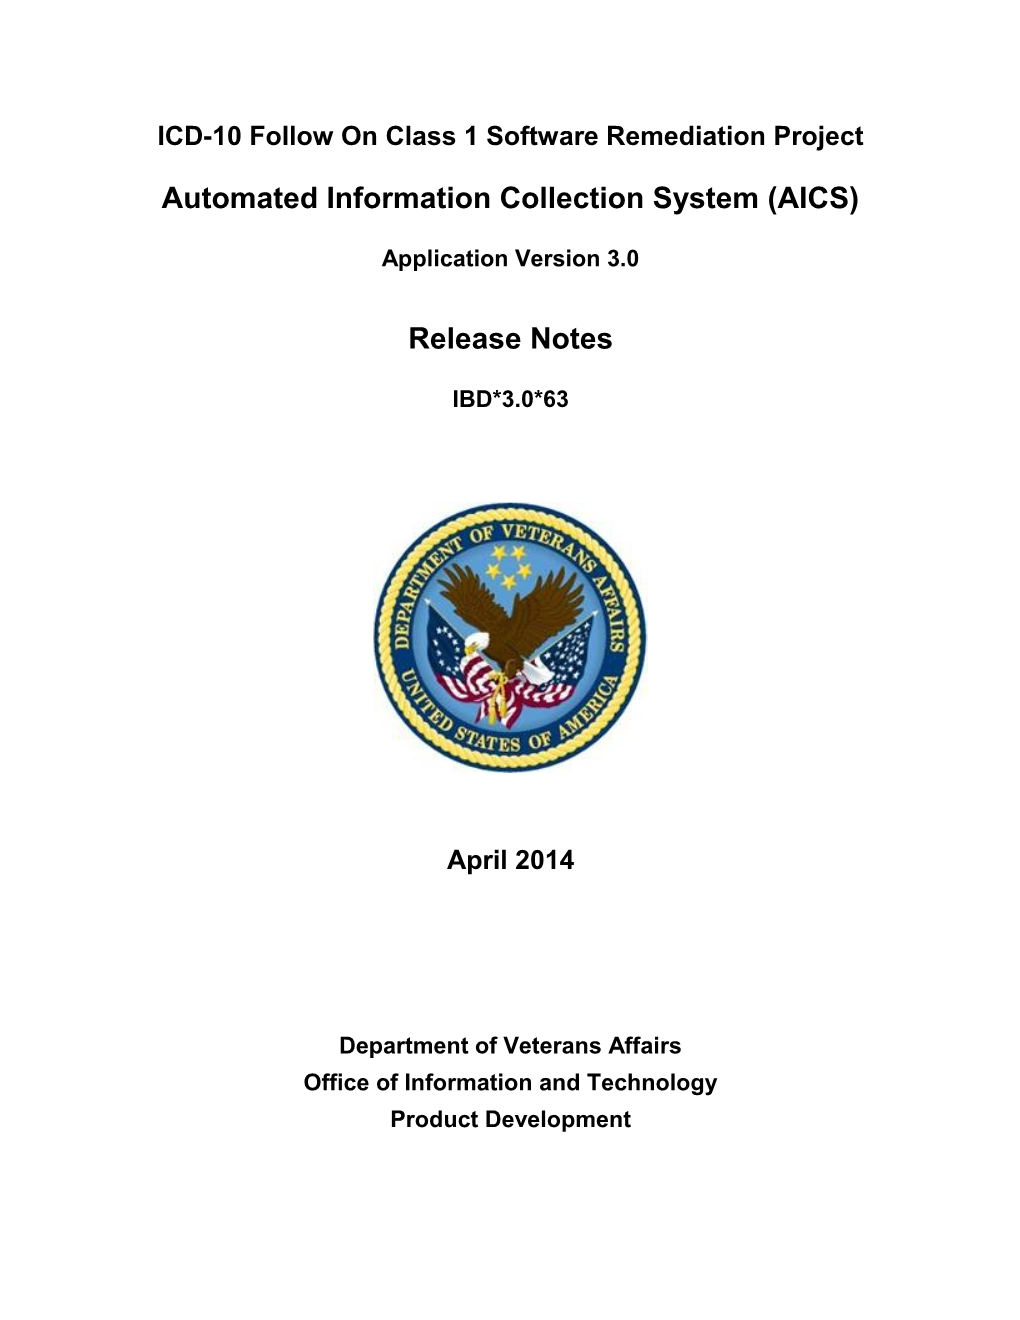 ICD-10 Class 1 Software Remediation Project Release Notes Template